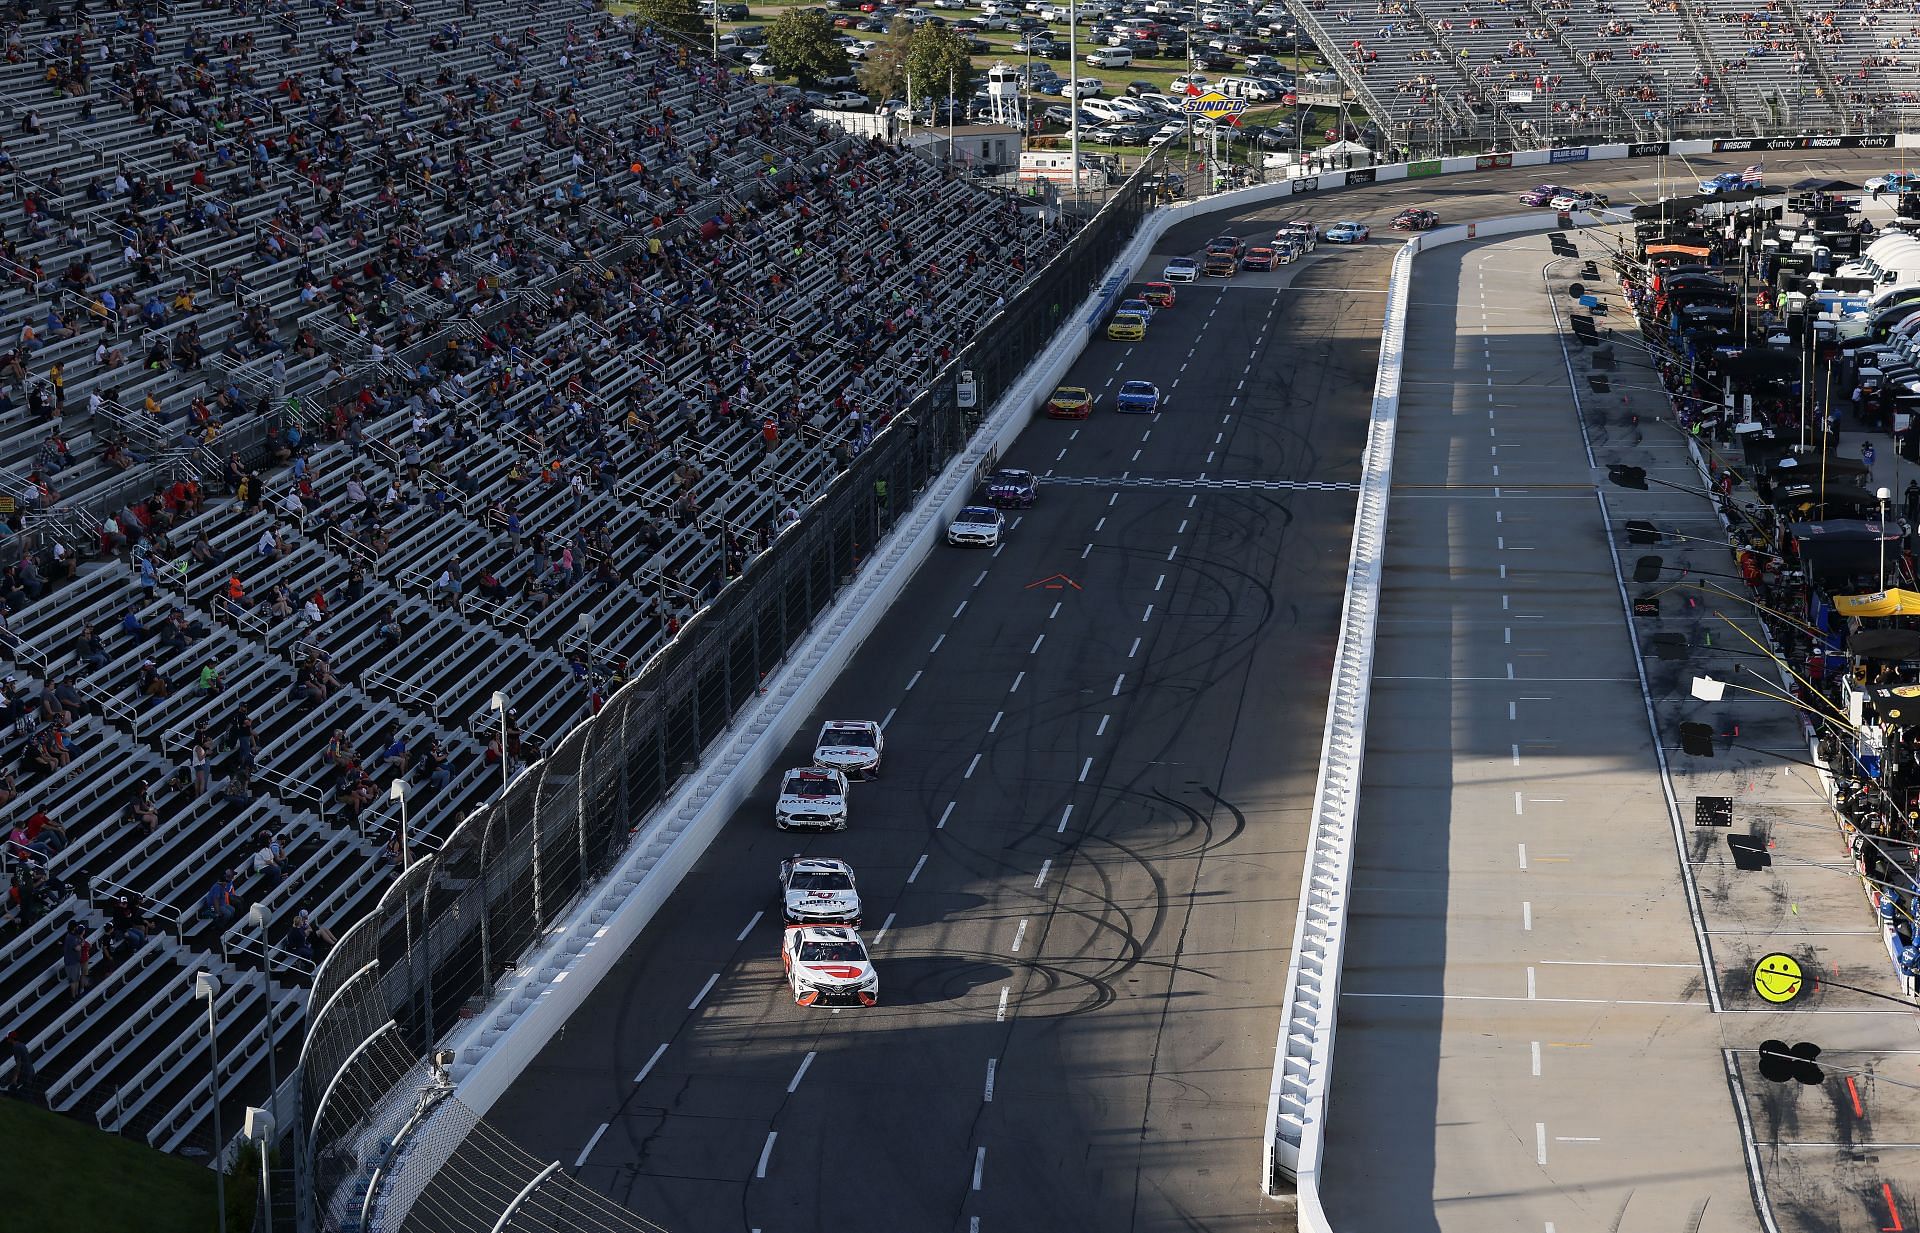 A general view of the NASCAR Cup Series Blue-Emu Maximum Pain Relief 500 at Martinsville Speedway. (Photo by James Gilbert/Getty Images)